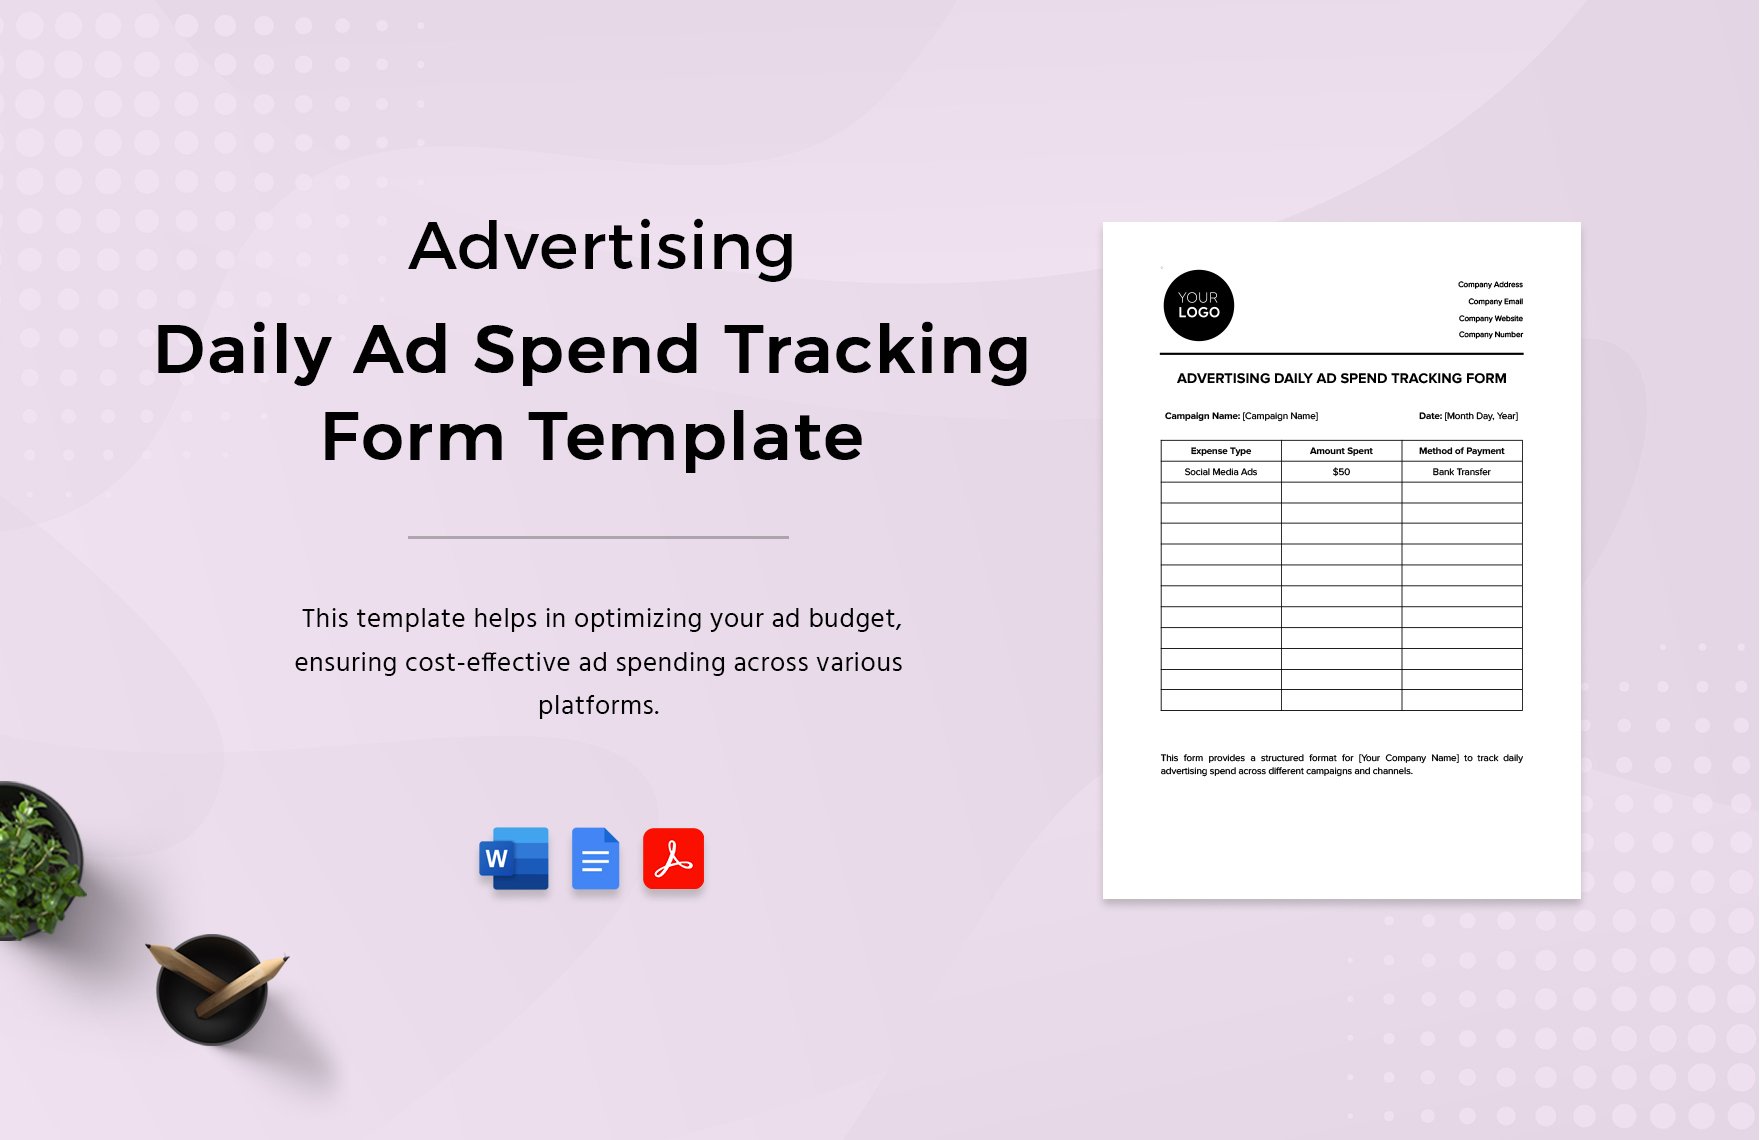 Advertising Daily Ad Spend Tracking Form Template in Word, Google Docs, PDF